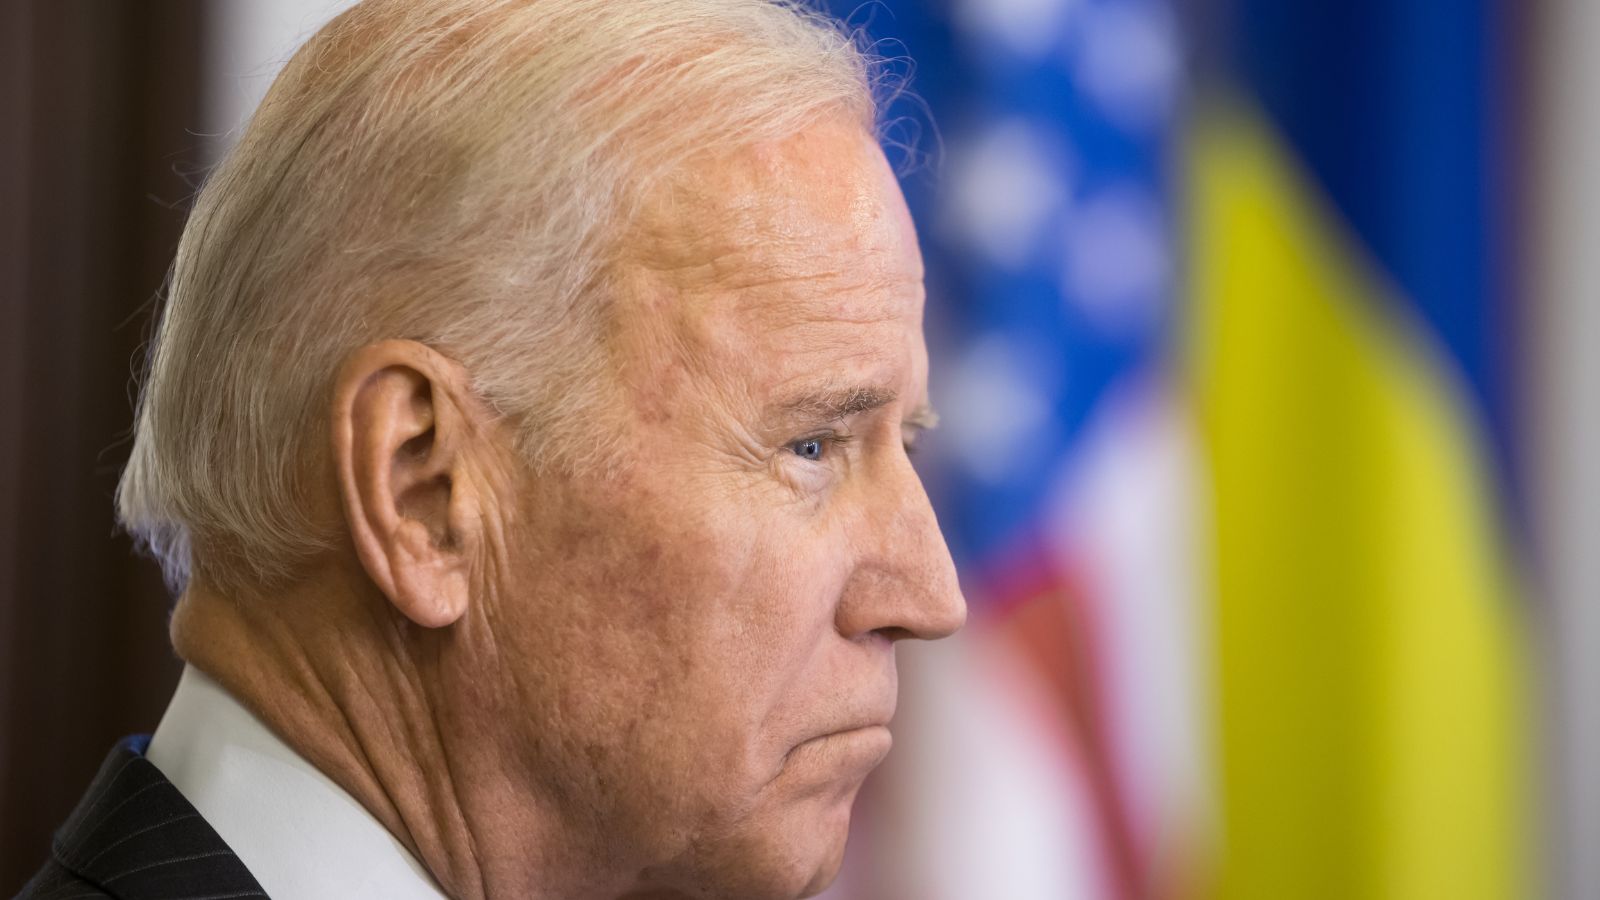 “Biden Is Not a Leader, He Is a Divider”: Biden Campaign Causes Internet Meltdown With “Crazy MAGA Nonsense” Social Media Post